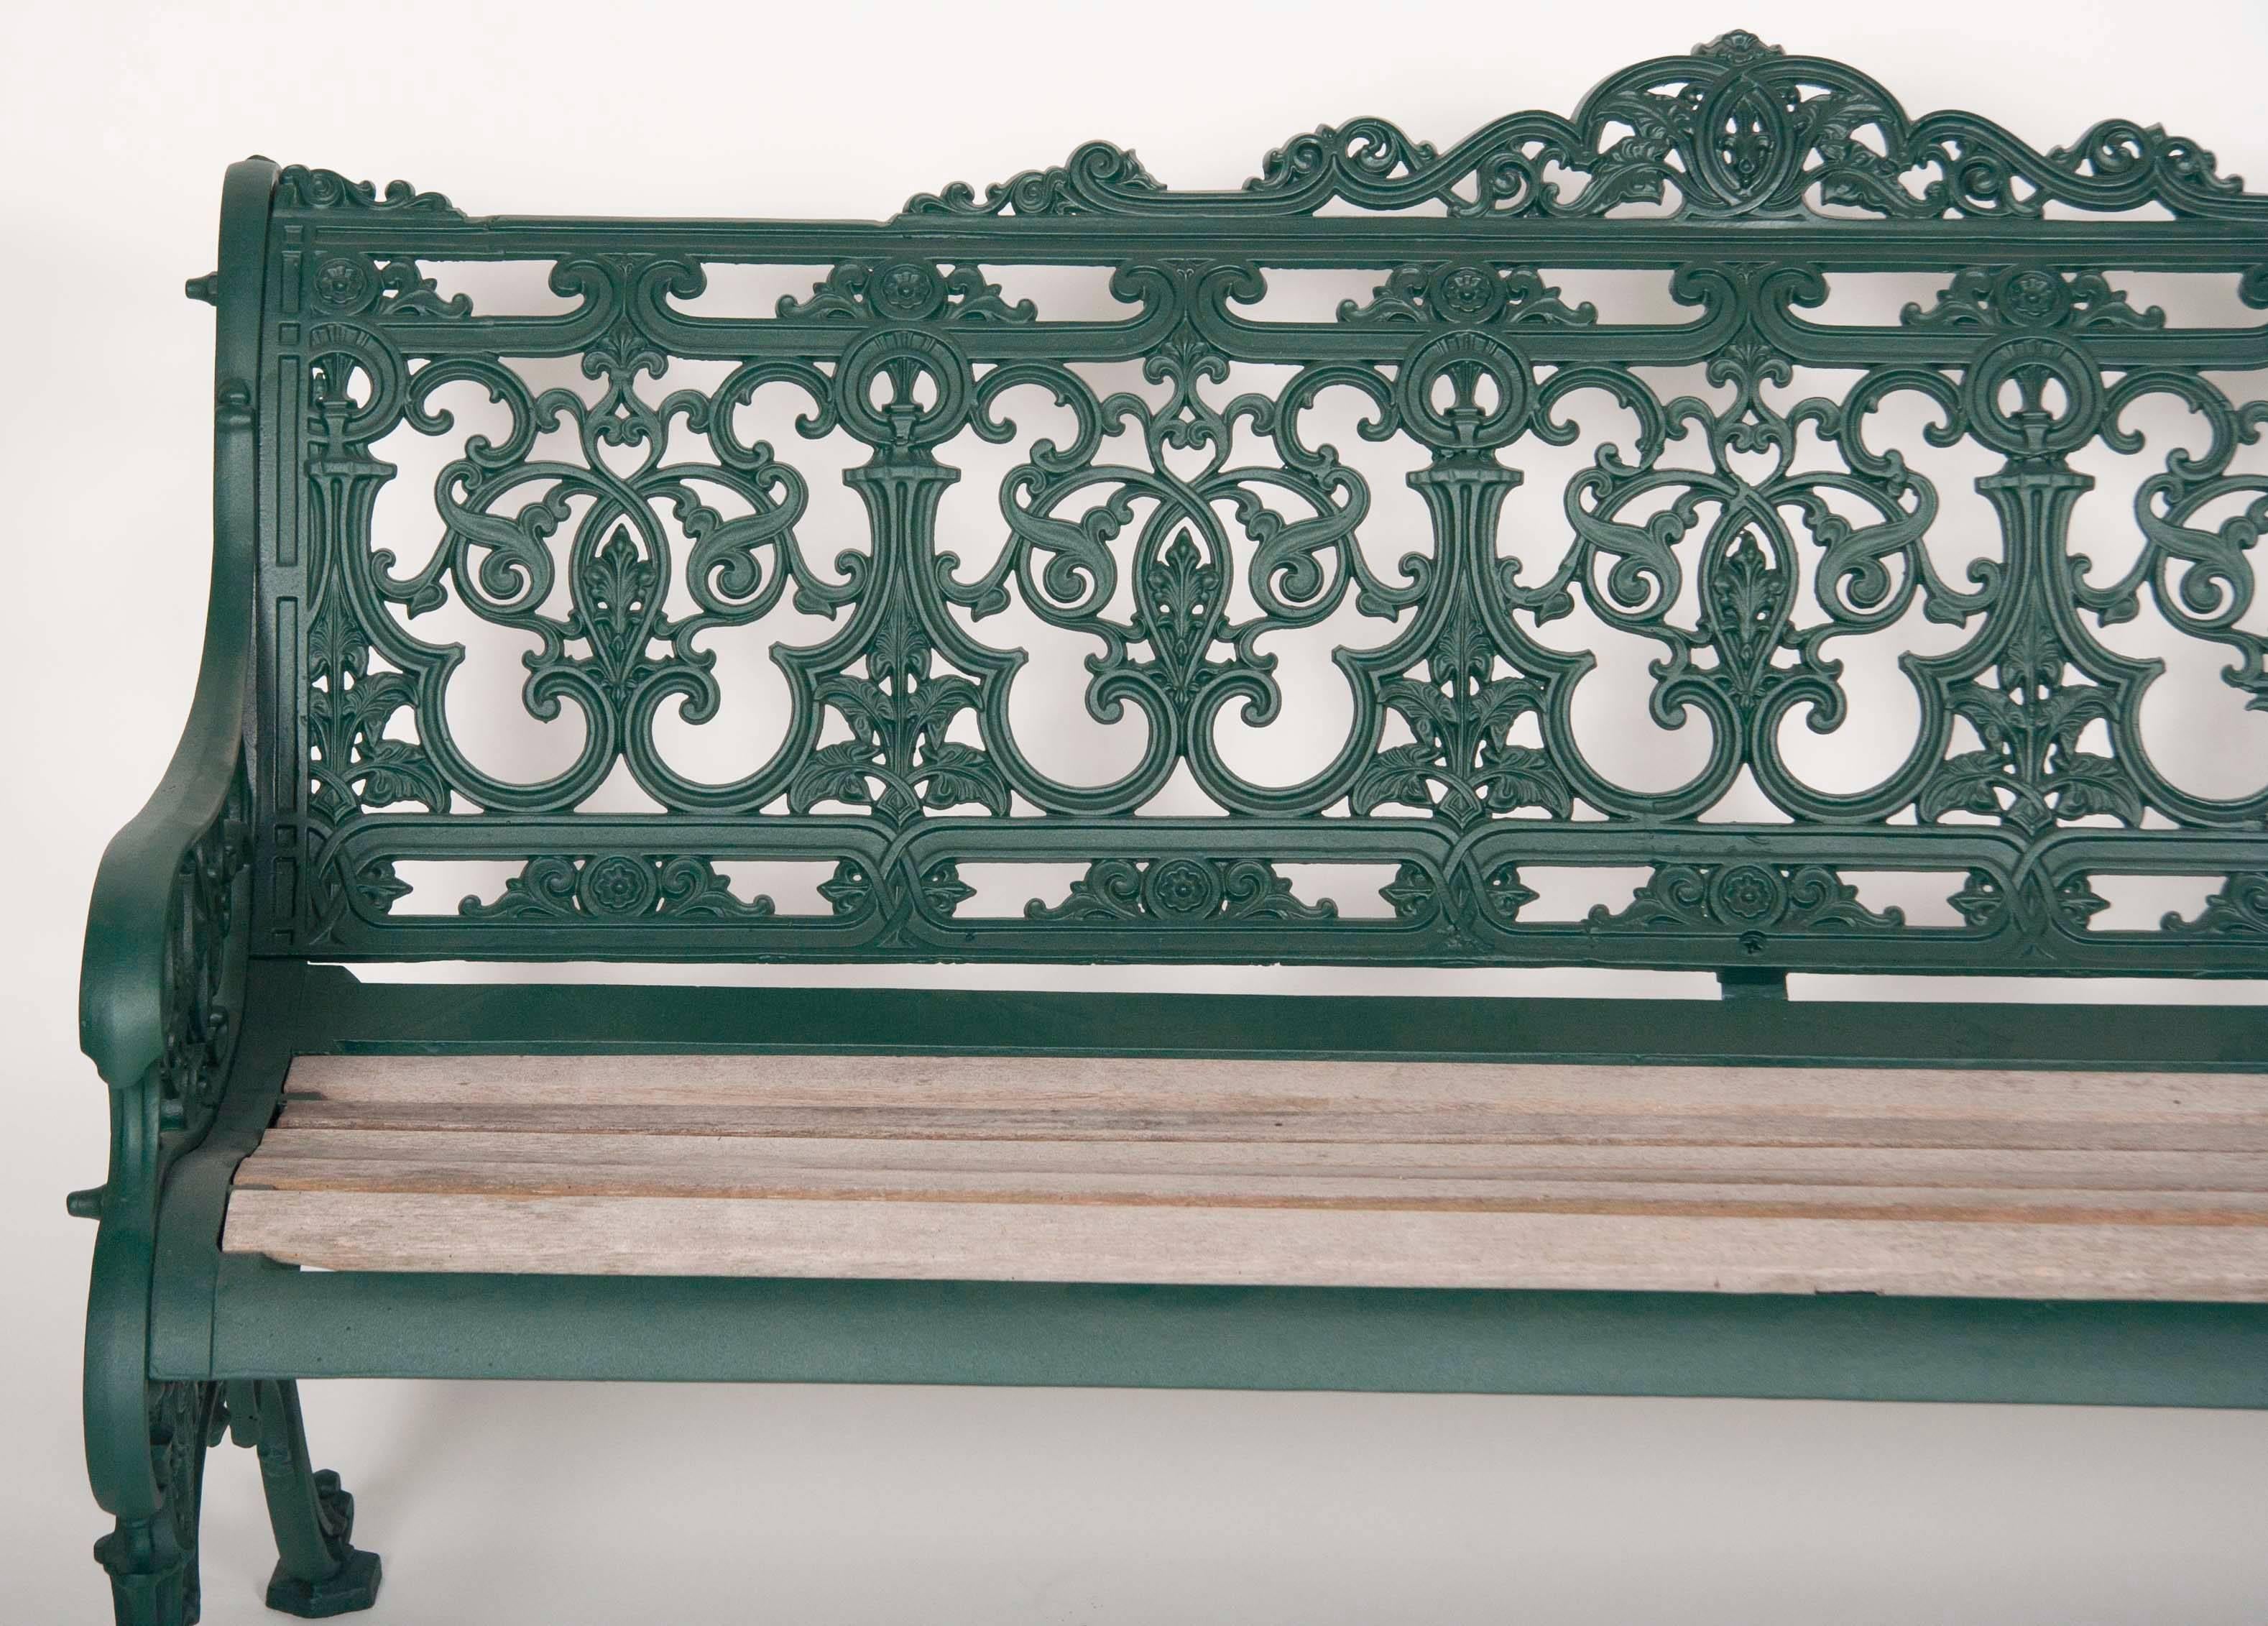 cast iron bench for sale